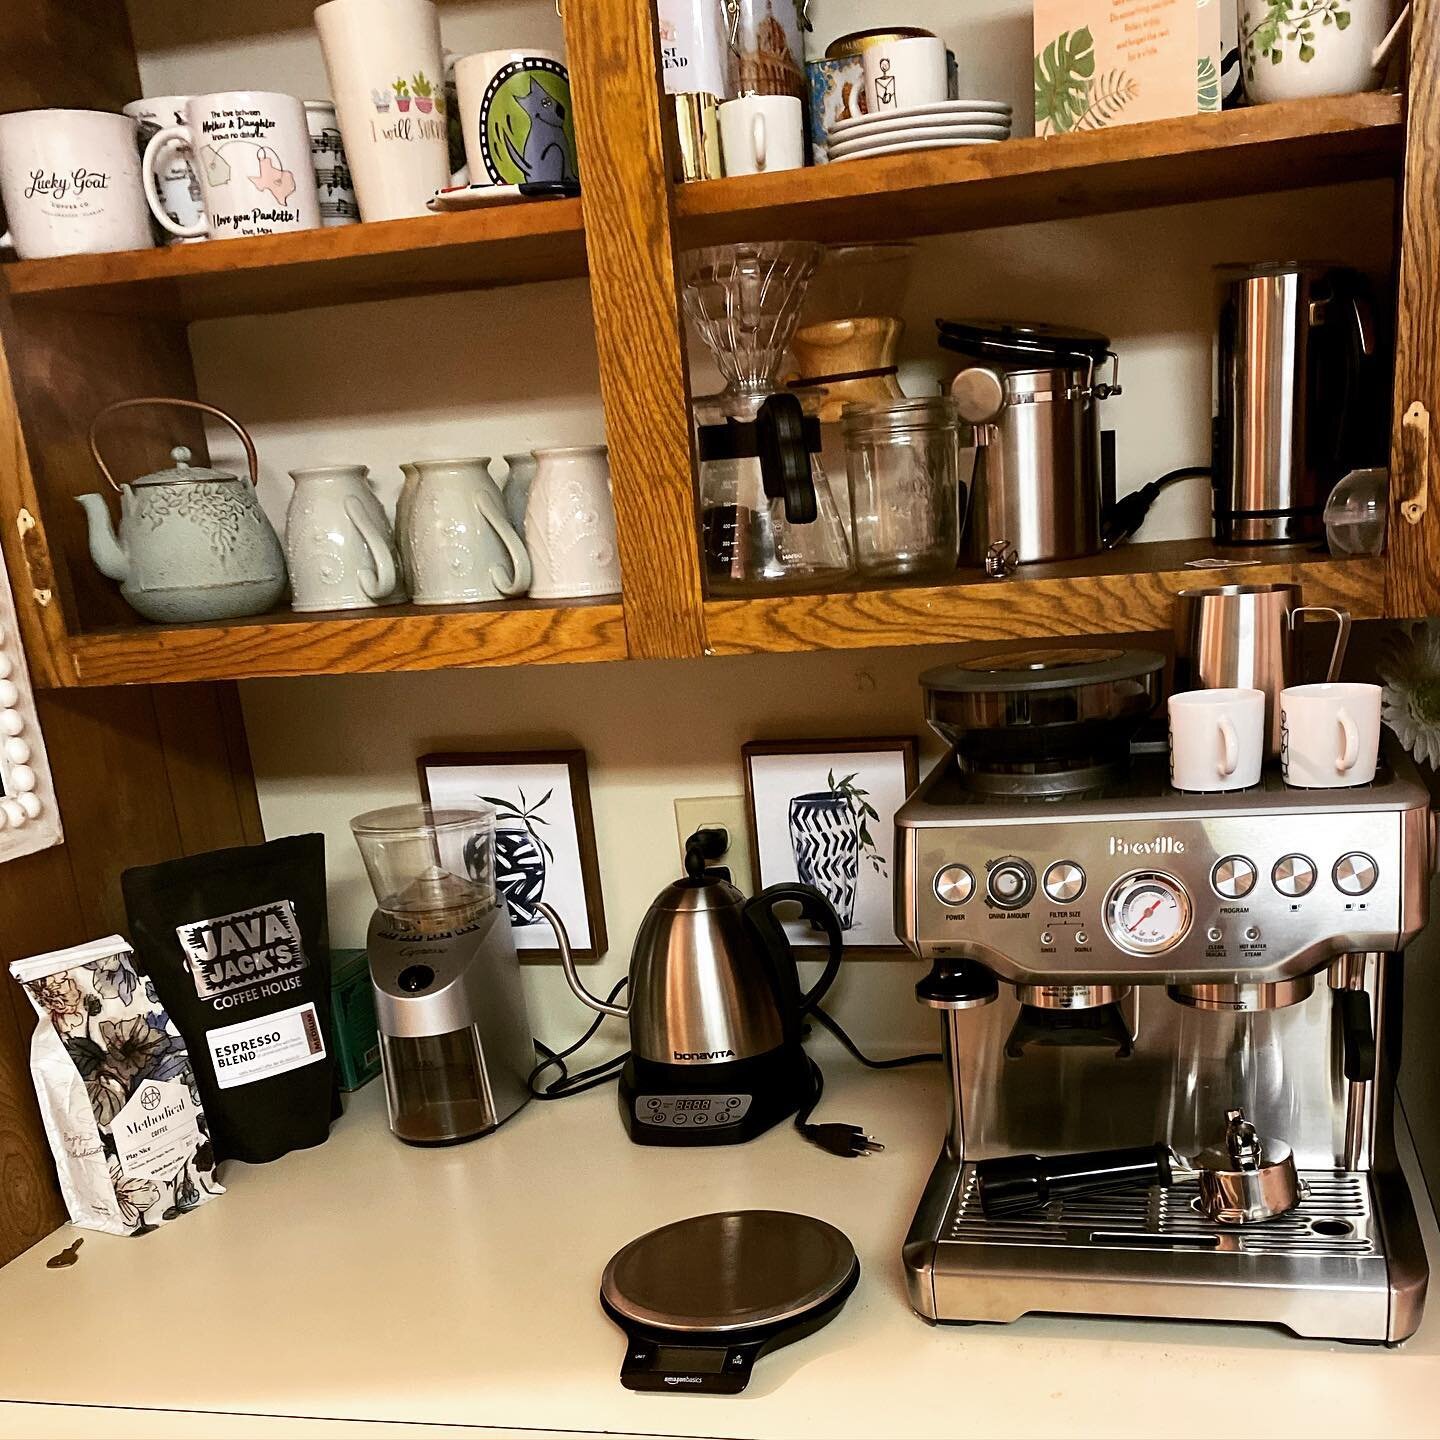 Updated the coffee station at our house with a Breville Barista Express! @ptt_wandergram  and I love making espresso drinks in the morning. More options for our caffeine kick!
#coffee #coffeelover #barista #espresso